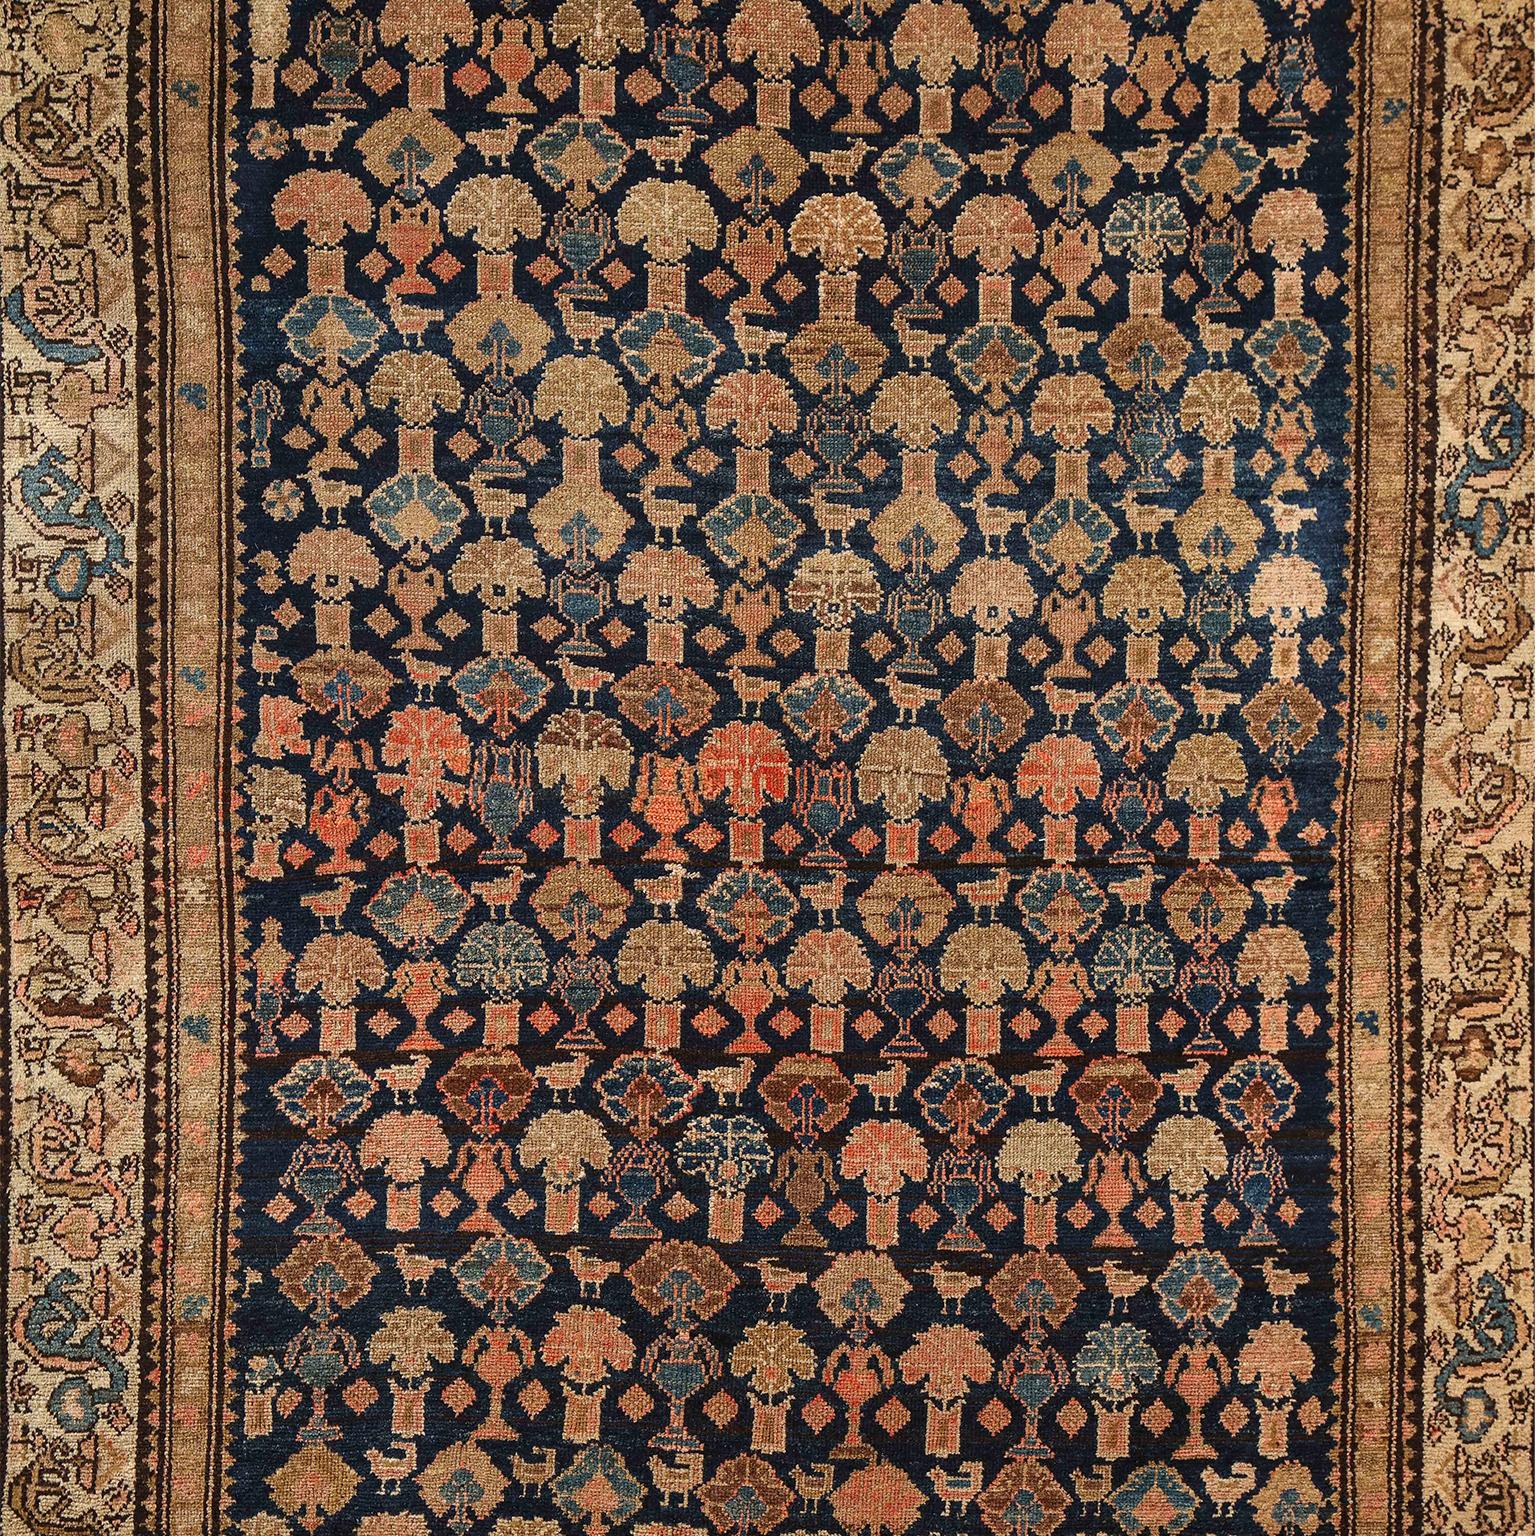 This Persian Malayer carpet circa 1900 consists of pure handspun wool and vegetable dyes. It is hand-knotted on a cotton warp and wool weft, featuring natural hues of indigo, gold, light blue, and orange amid neutral creams and tans. The colors have